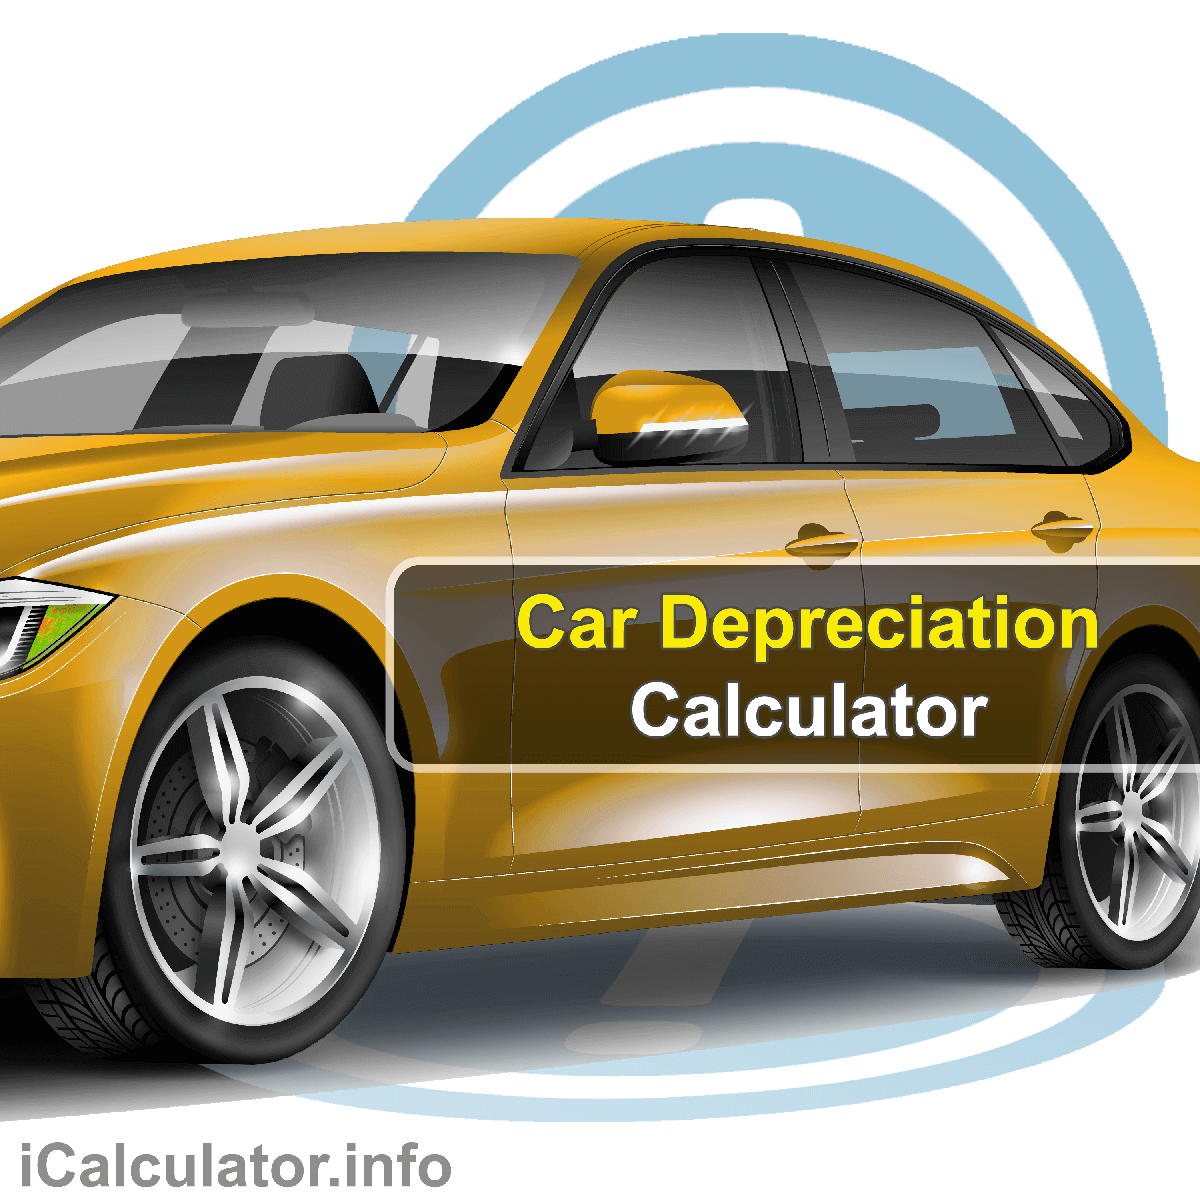 Car Depreciation Calculator. This image provides details of how to calculate depreciation costs of a car using a calculator and notepad. By using the car depreciation formula, the Car Depreciation Calculator provides a true calculation of the future value of a car when factoring in depreciation.